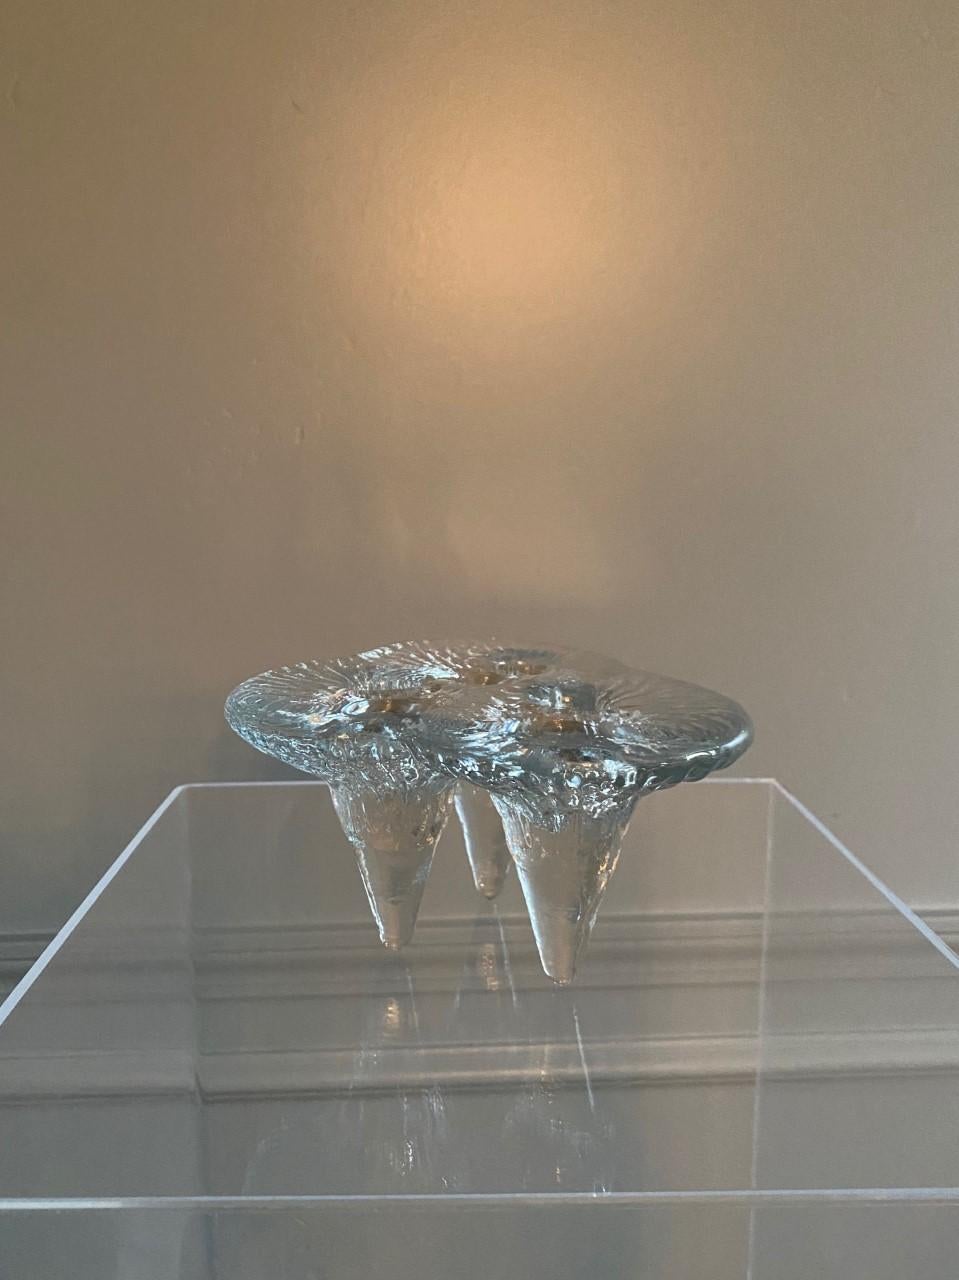 Beautiful vintage Blenko candleholder. Shaped in an artistic organic amoeba form, this glass sculpture is beautiful, artful and sculptural all at the same time. An amoeba like form encompasses the top while a tripod form adds a sculptural profile.